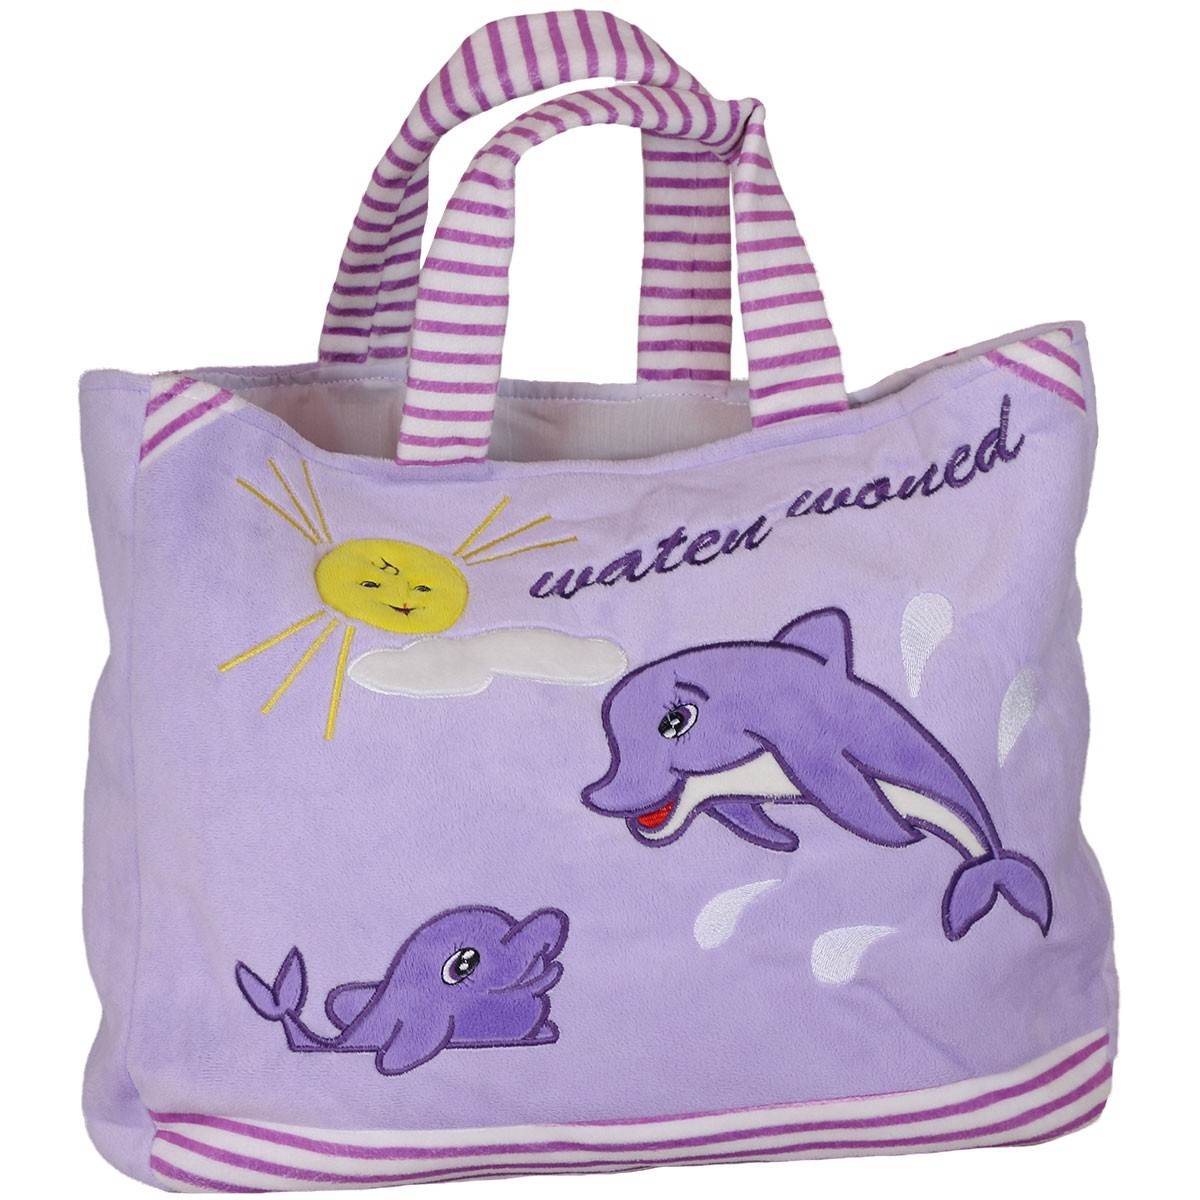 Bag with dolphins - Purple